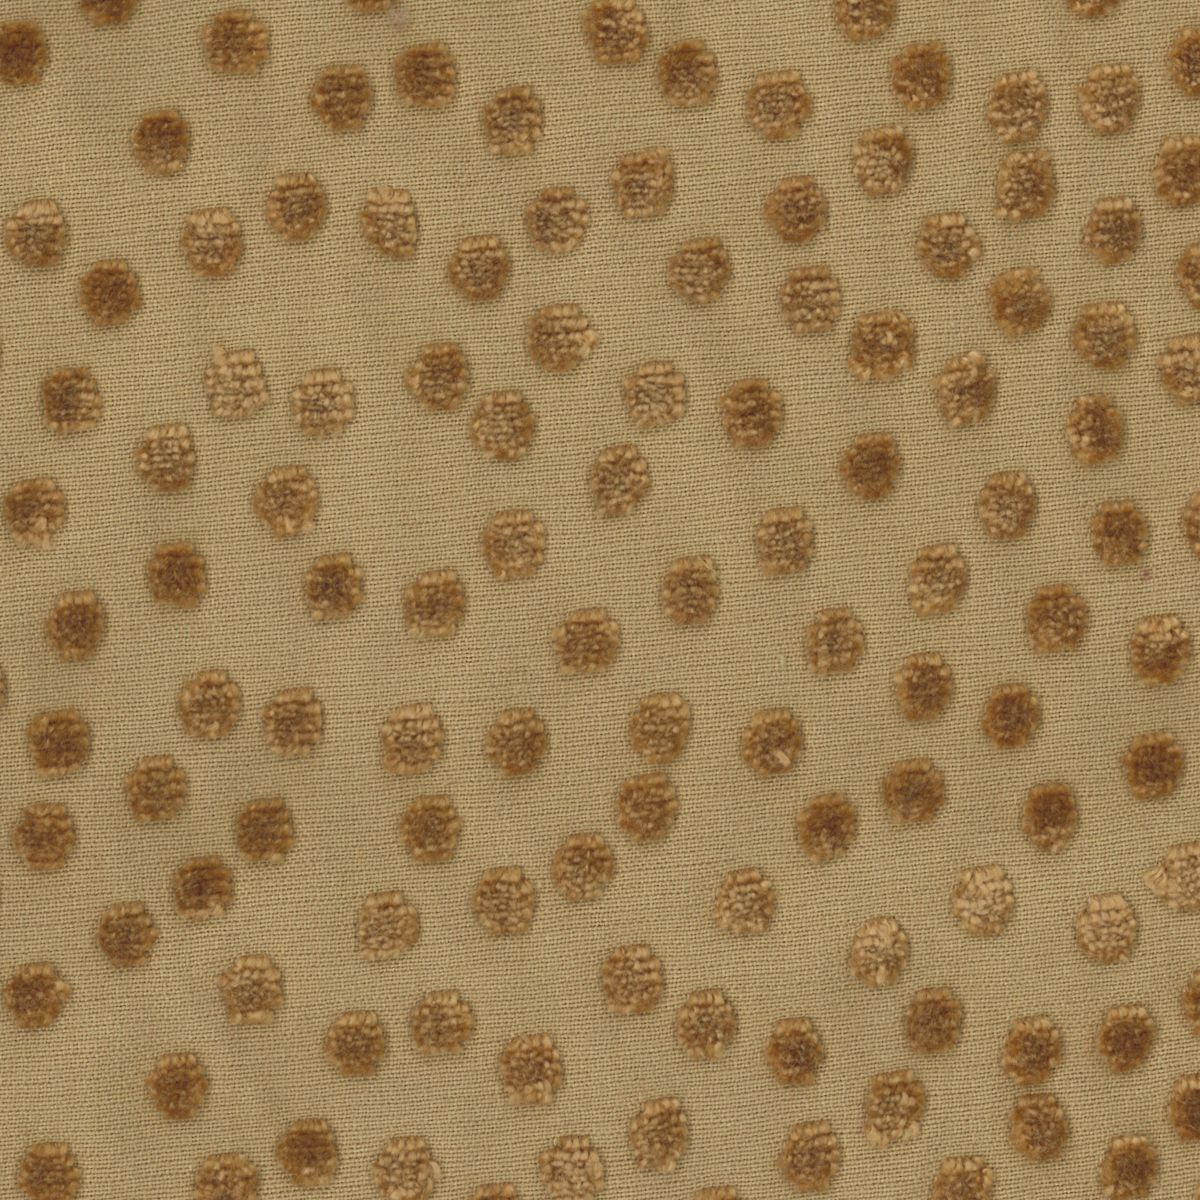 Dotty fabric in desert color - pattern number GG 00042005 - by Scalamandre in the Old World Weavers collection